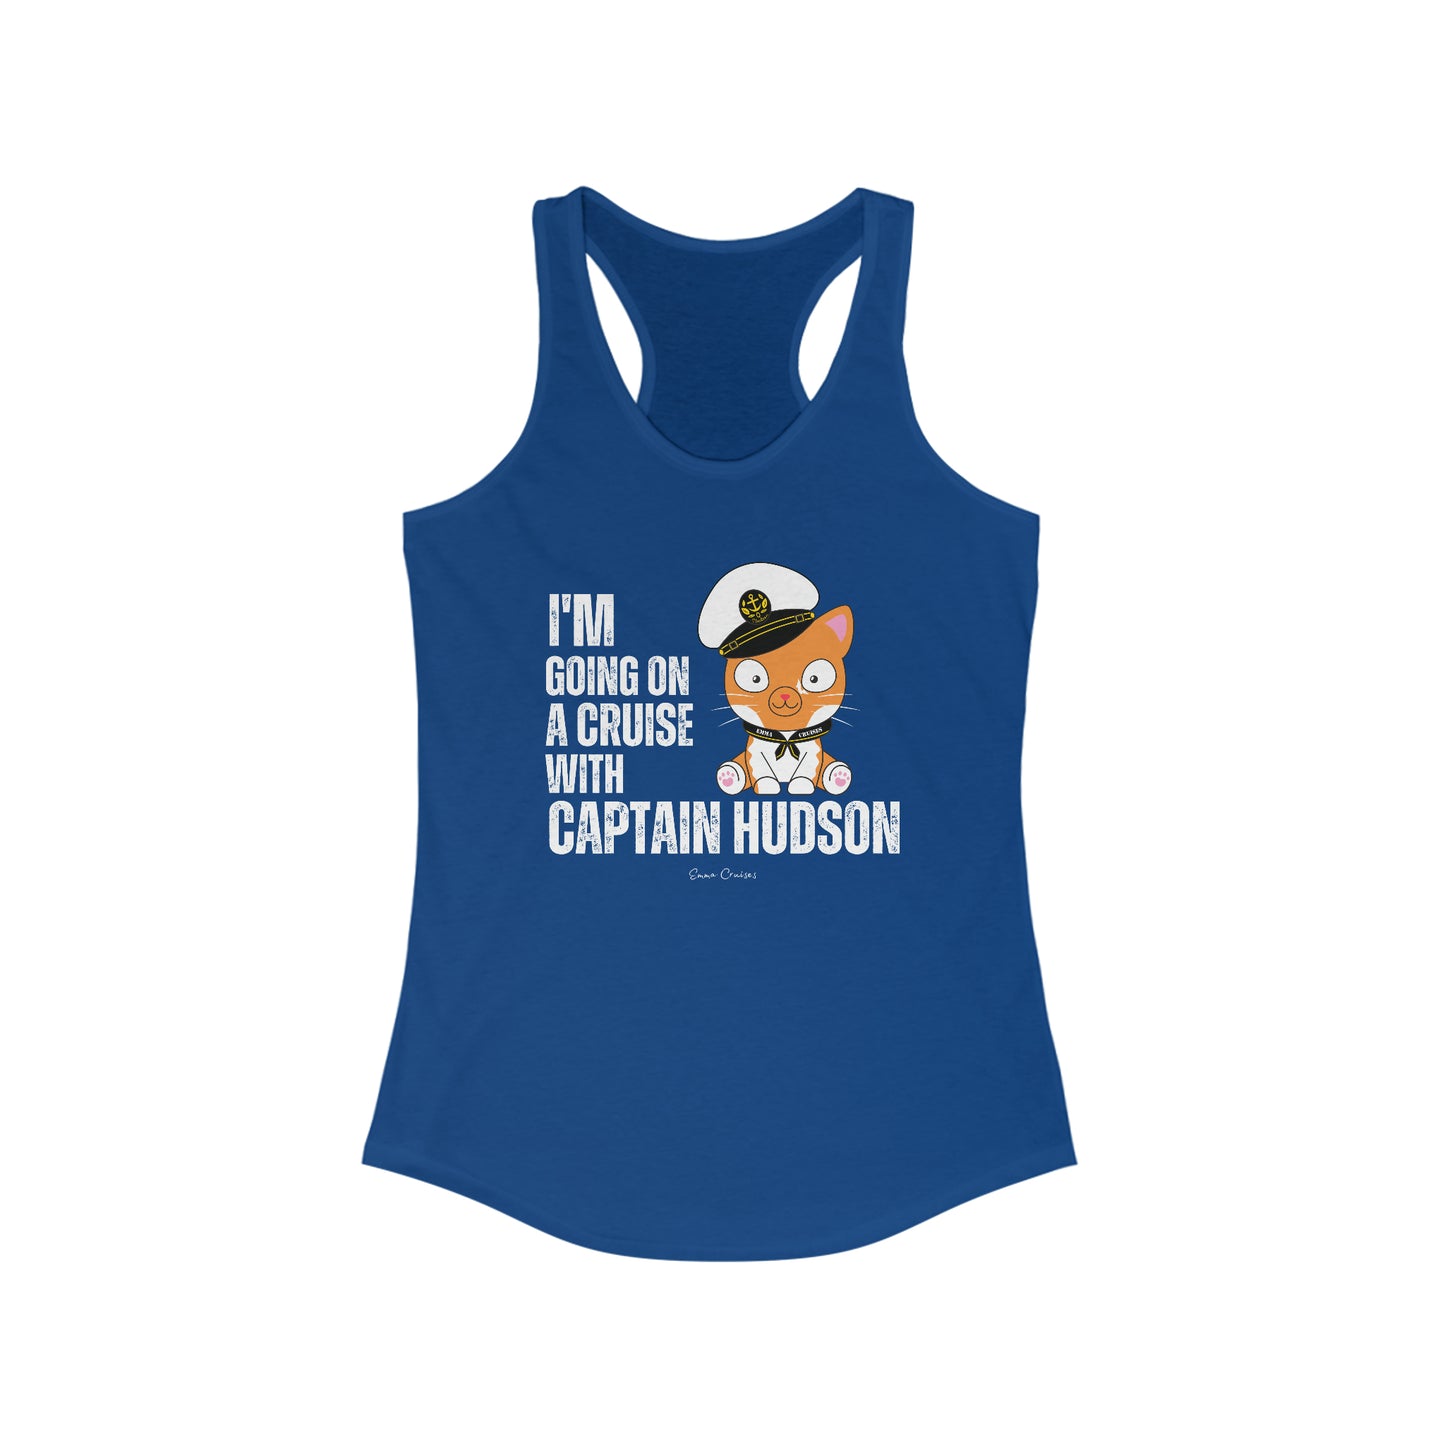 I'm Going on a Cruise With Captain Hudson - Tank Top